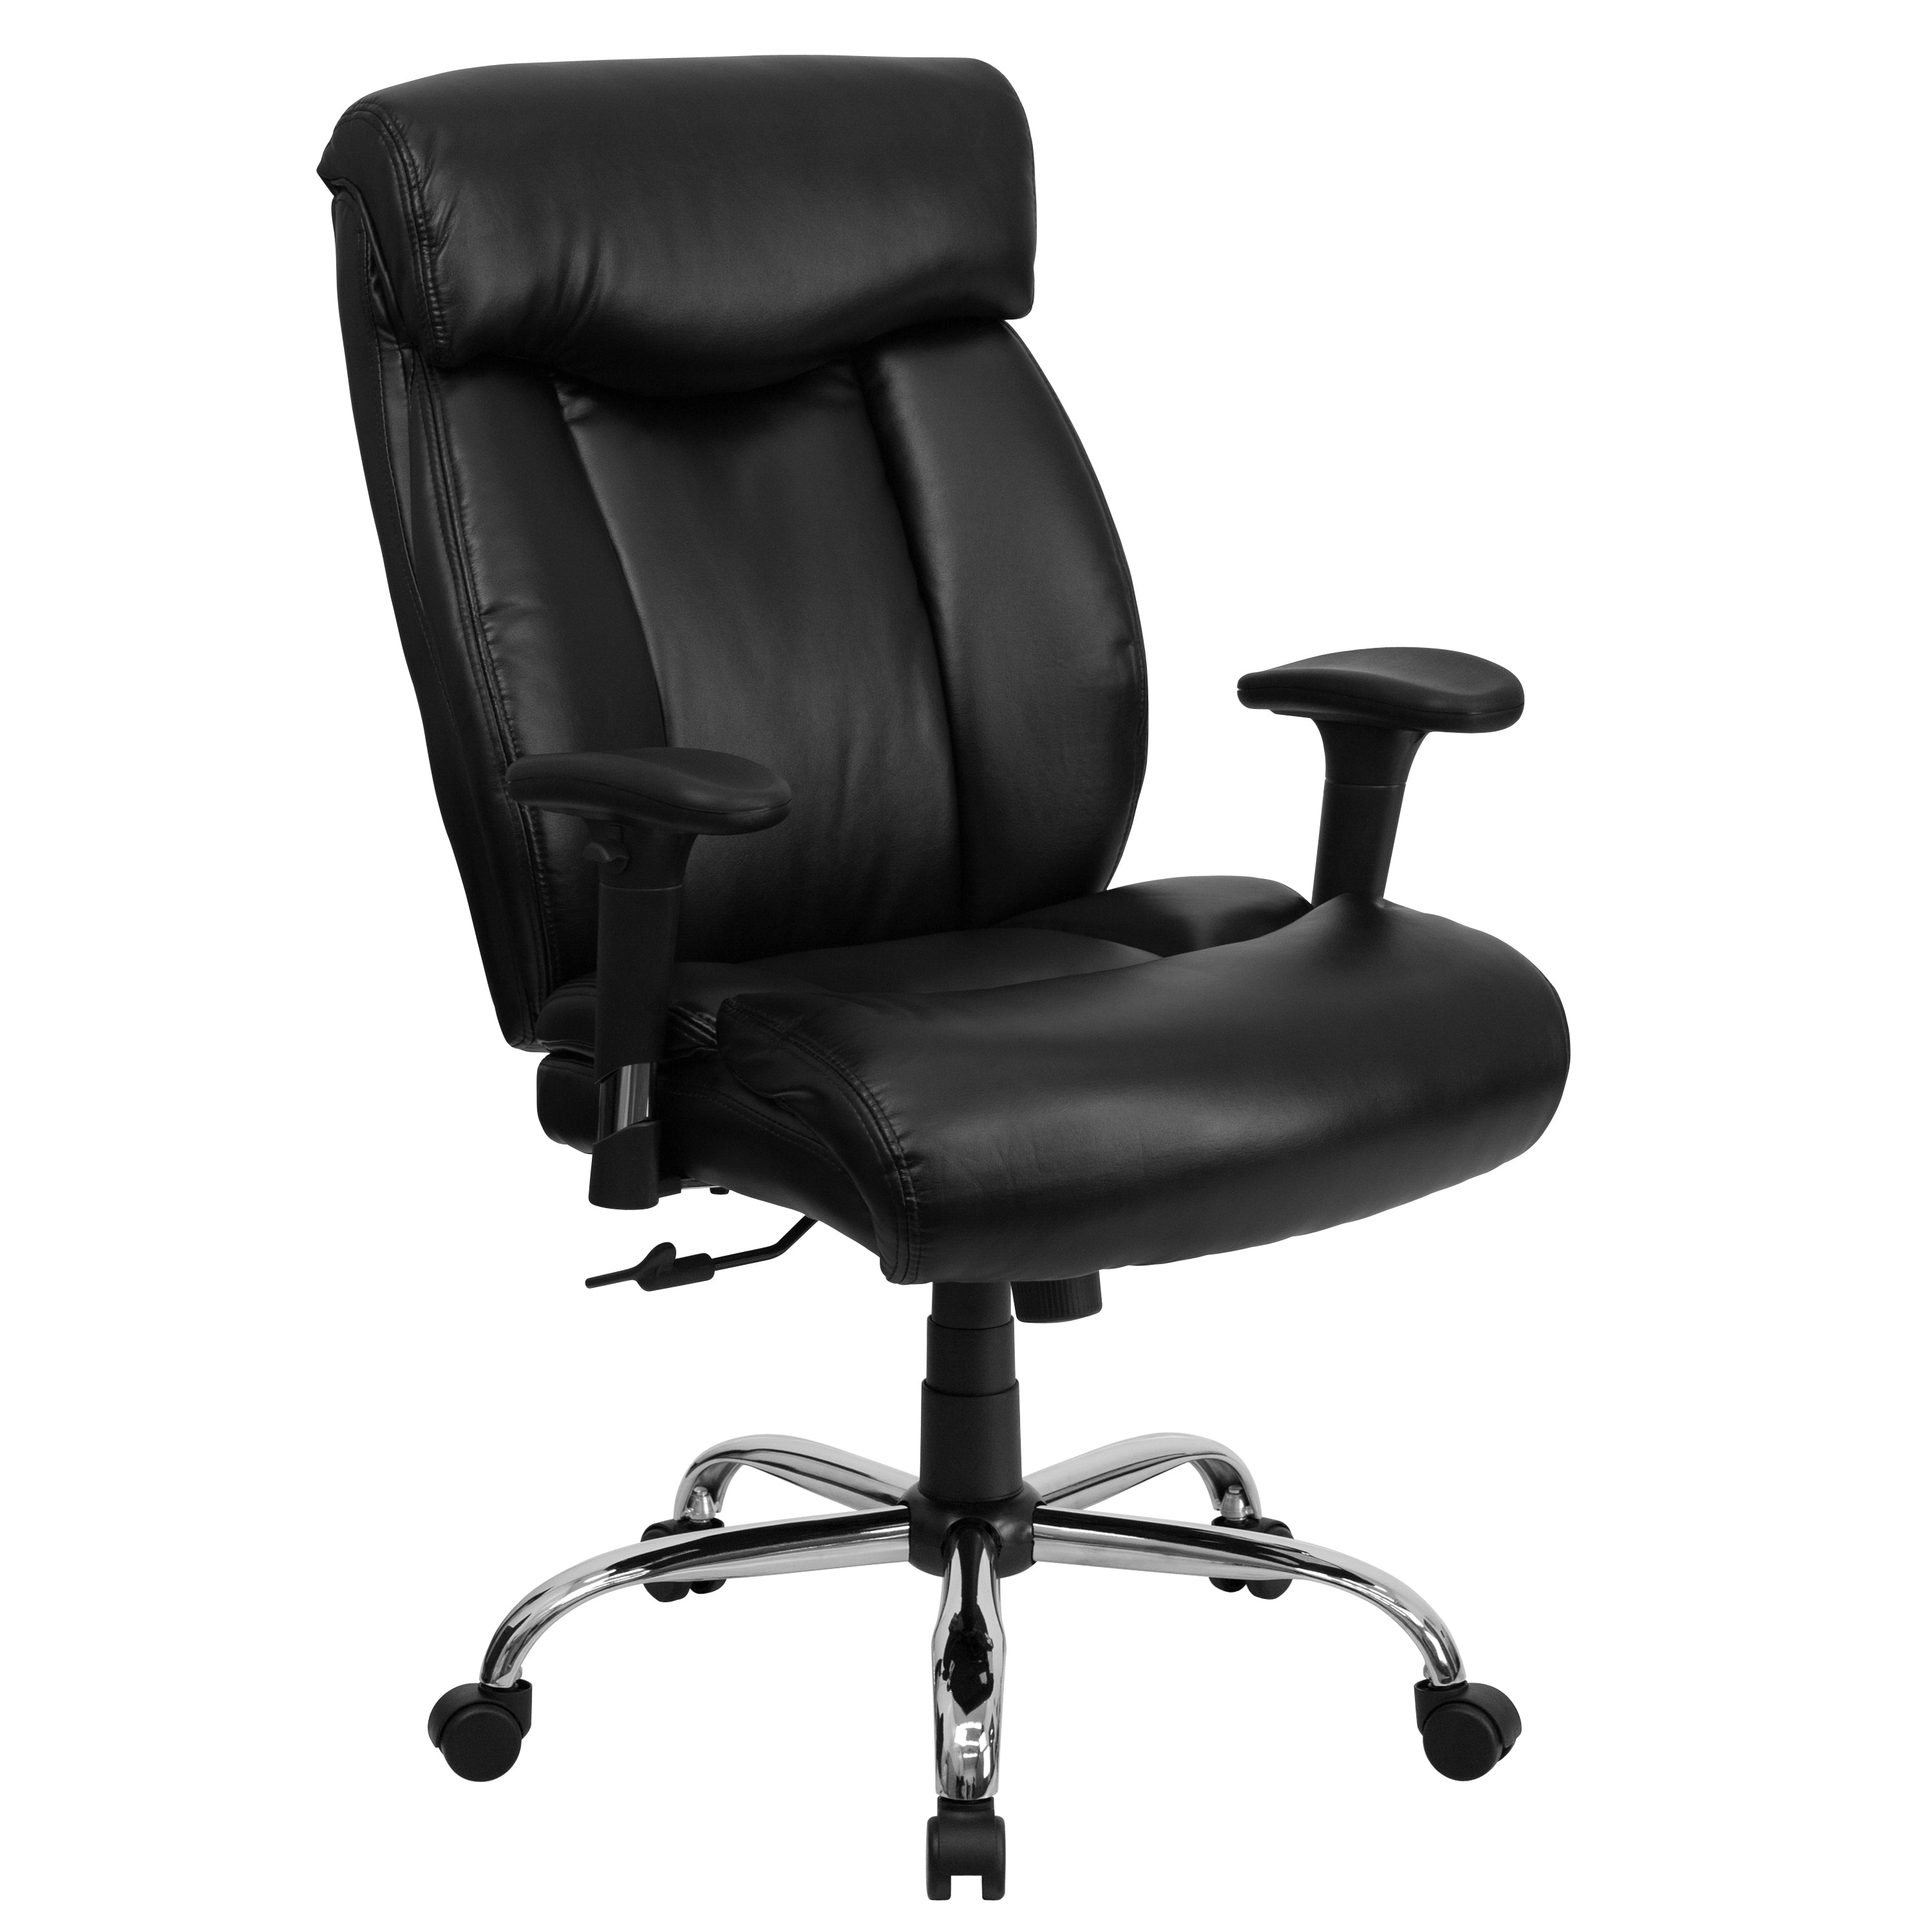 HERCULES Series Big & Tall 400 lb. Rated High Back Executive Swivel Ergonomic Office Chair with Full Headrest and Adjustable Arms-Big & Tall Office Chair-Flash Furniture-Wall2Wall Furnishings